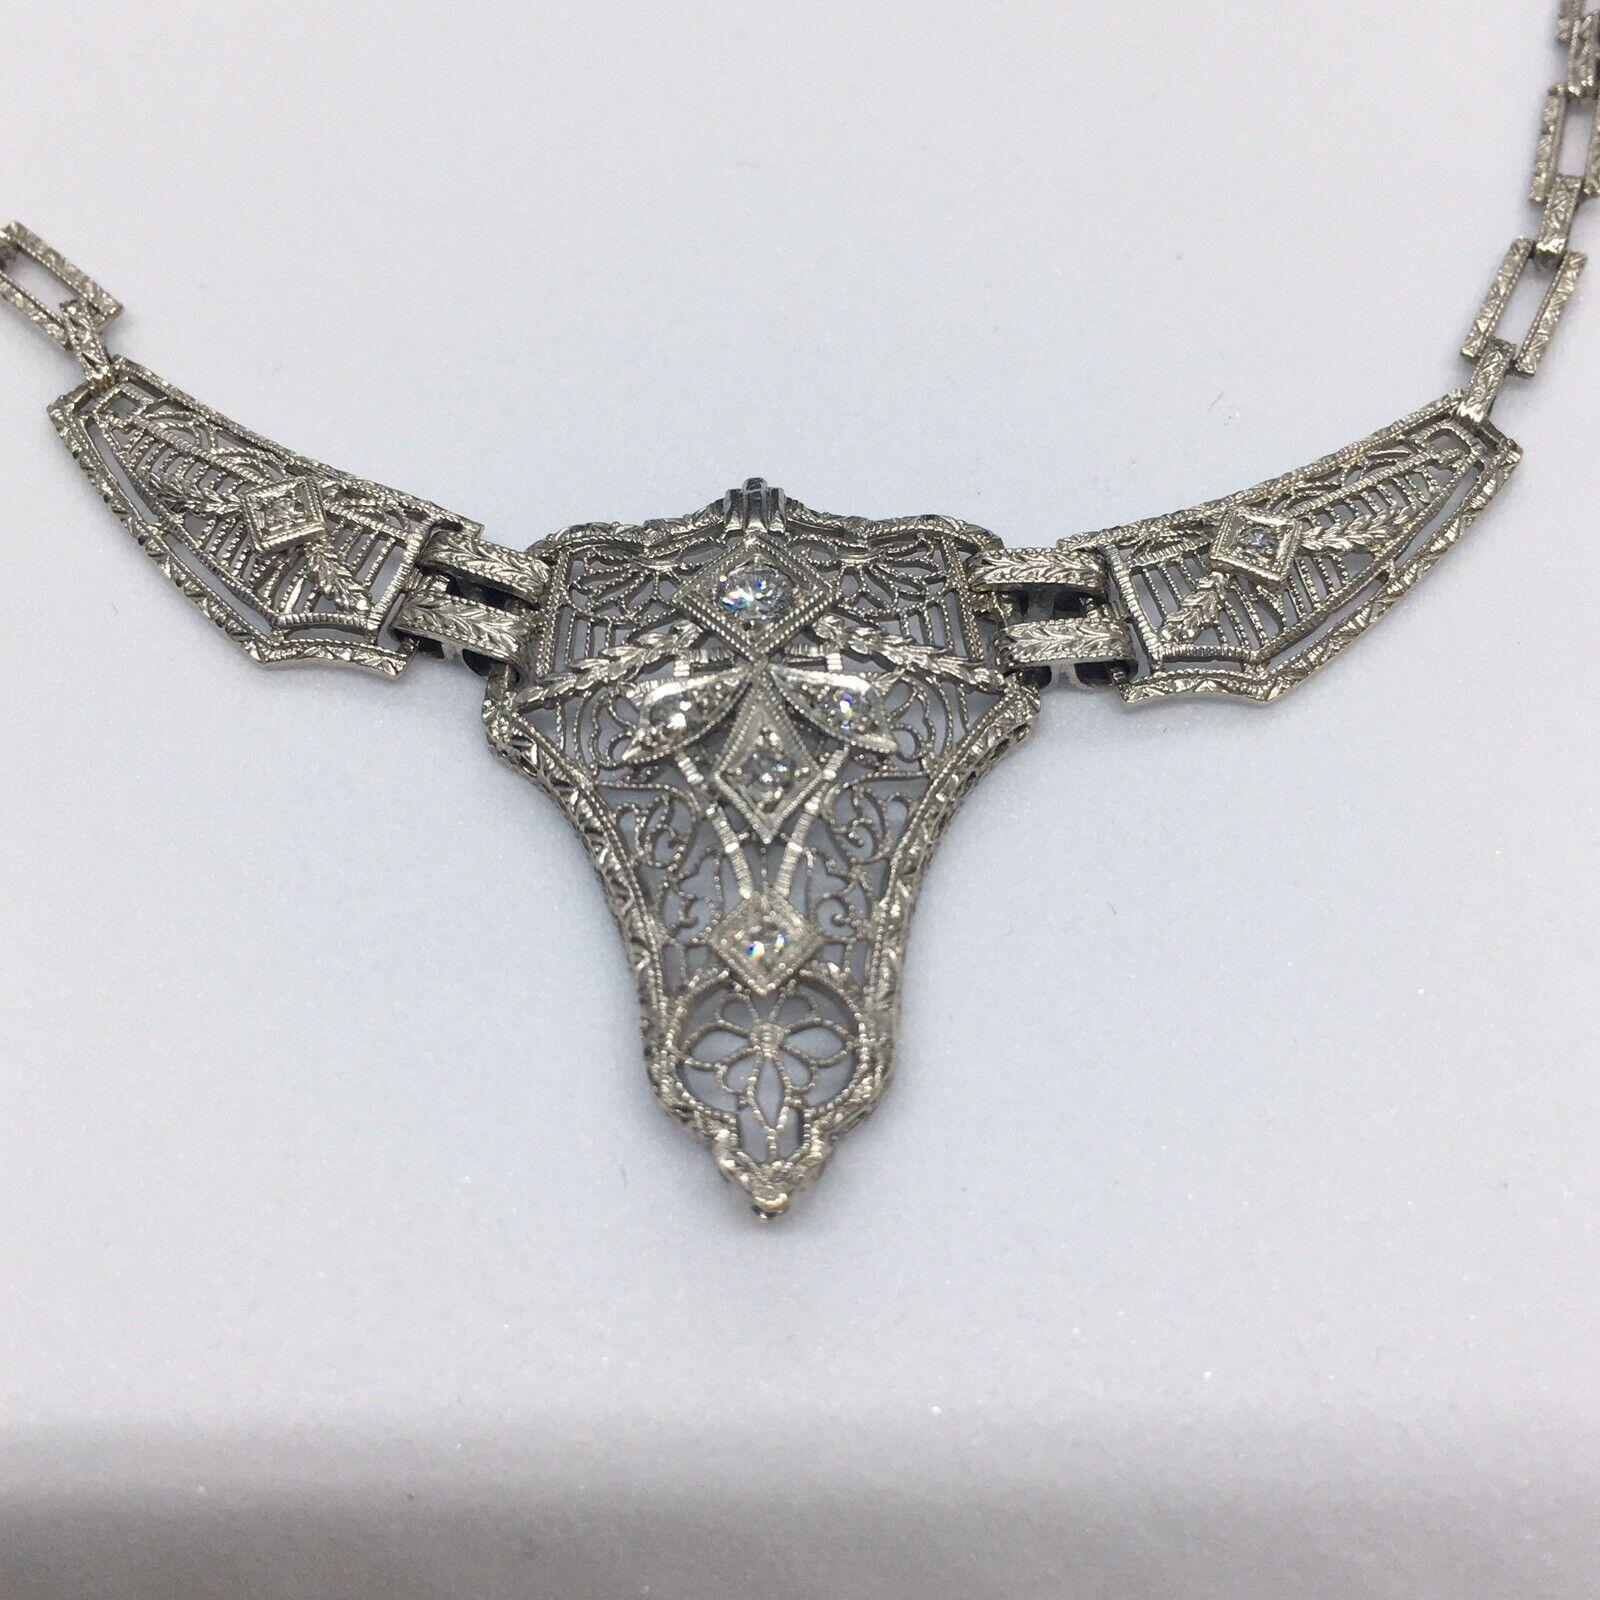 Platinum Topped Gold Necklace 

Antique Art Deco 14K Gold & Platinum American Made Necklace Hallmark 1920s

Weighting 10.4 gram
16 inch long
Center piece 1.25 inch long
Total of 0.20 carat Diamonds 7 Single Cut and one larger Transition Cut
Links